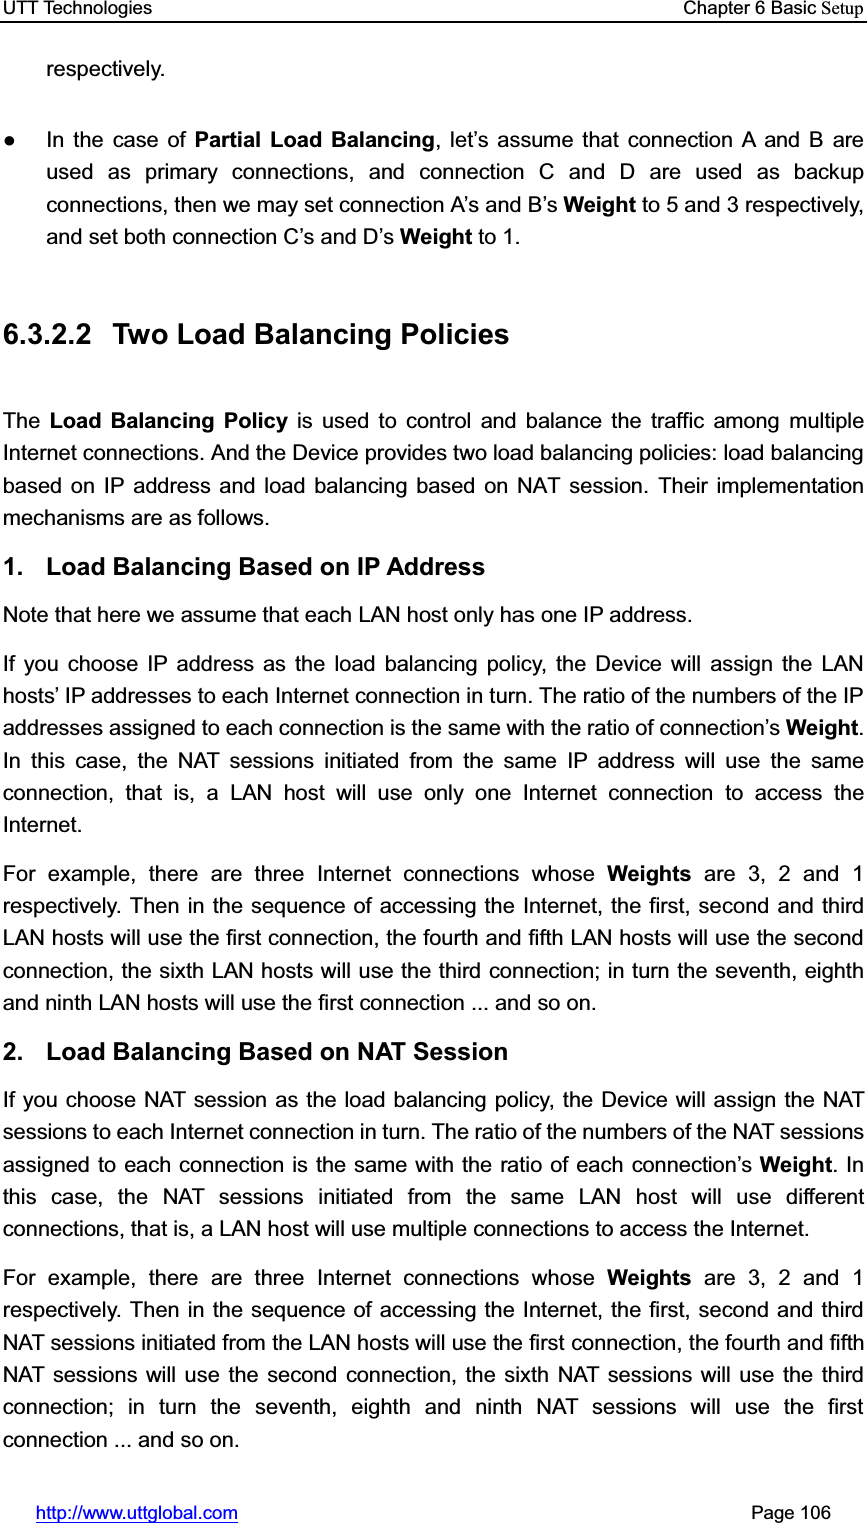 UTT Technologies    Chapter 6 Basic Setuphttp://www.uttglobal.com                                                       Page 106 respectively.  Ɣ  In the case of Partial Load Balancing, let¶s assume that connection A and B are used as primary connections, and connection C and D are used as backup connections, then we may set connection A¶s and B¶sWeight to 5 and 3 respectively, and set both connection C¶s and D¶sWeight to 1. 6.3.2.2  Two Load Balancing Policies The Load Balancing Policy is used to control and balance the traffic among multiple Internet connections. And the Device provides two load balancing policies: load balancing based on IP address and load balancing based on NAT session. Their implementation mechanisms are as follows. 1.  Load Balancing Based on IP Address Note that here we assume that each LAN host only has one IP address.   If you choose IP address as the load balancing policy, the Device will assign the LAN hosts¶ IP addresses to each Internet connection in turn. The ratio of the numbers of the IP addresses assigned to each connection is the same with the ratio of connection¶sWeight.In this case, the NAT sessions initiated from the same IP address will use the same connection, that is, a LAN host will use only one Internet connection to access the Internet.  For example, there are three Internet connections whose Weights are 3, 2 and 1 respectively. Then in the sequence of accessing the Internet, the first, second and third LAN hosts will use the first connection, the fourth and fifth LAN hosts will use the second connection, the sixth LAN hosts will use the third connection; in turn the seventh, eighth and ninth LAN hosts will use the first connection ... and so on. 2.  Load Balancing Based on NAT Session If you choose NAT session as the load balancing policy, the Device will assign the NAT sessions to each Internet connection in turn. The ratio of the numbers of the NAT sessions assigned to each connection is the same with the ratio of each connection¶sWeight. In this case, the NAT sessions initiated from the same LAN host will use different connections, that is, a LAN host will use multiple connections to access the Internet.   For example, there are three Internet connections whose Weights are 3, 2 and 1 respectively. Then in the sequence of accessing the Internet, the first, second and third NAT sessions initiated from the LAN hosts will use the first connection, the fourth and fifth NAT sessions will use the second connection, the sixth NAT sessions will use the third connection; in turn the seventh, eighth and ninth NAT sessions will use the first connection ... and so on. 